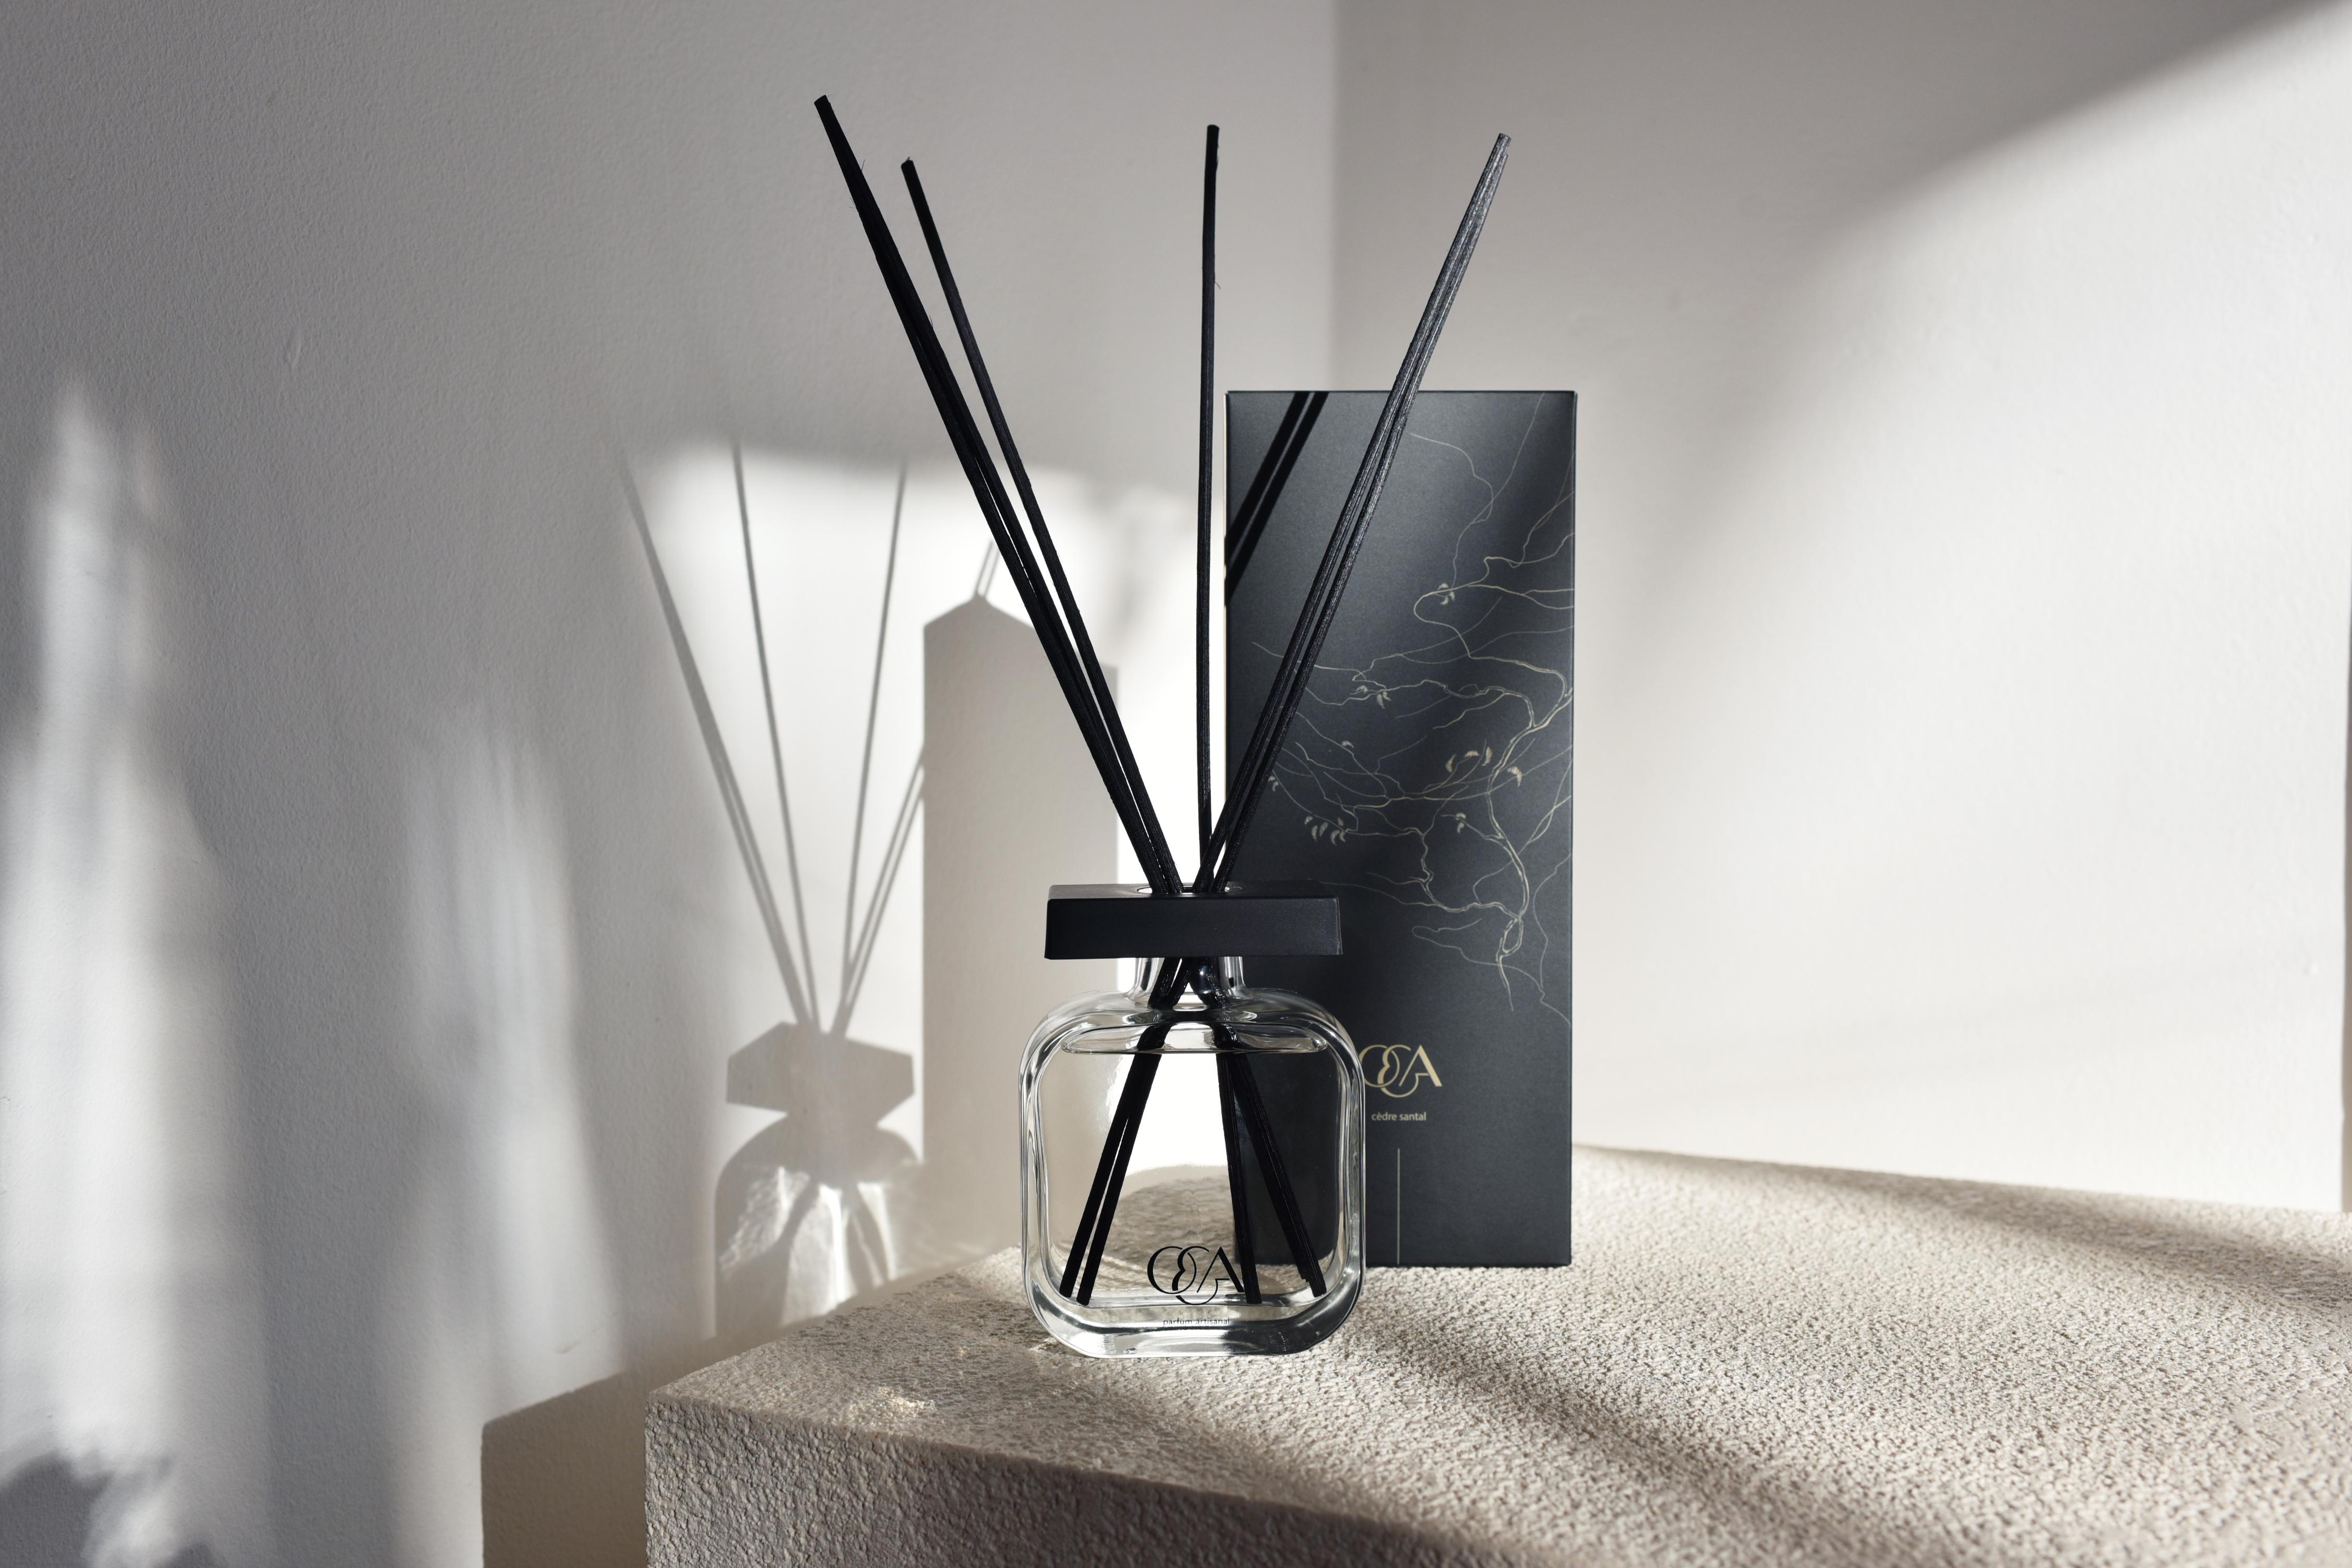 O&A London creates sophisticated scents for your home together with the best perfume houses in Grasse. Individually designed home diffusers will add an indelible impression of your home, literally in the air itself.

Top notes: aromatic notes,